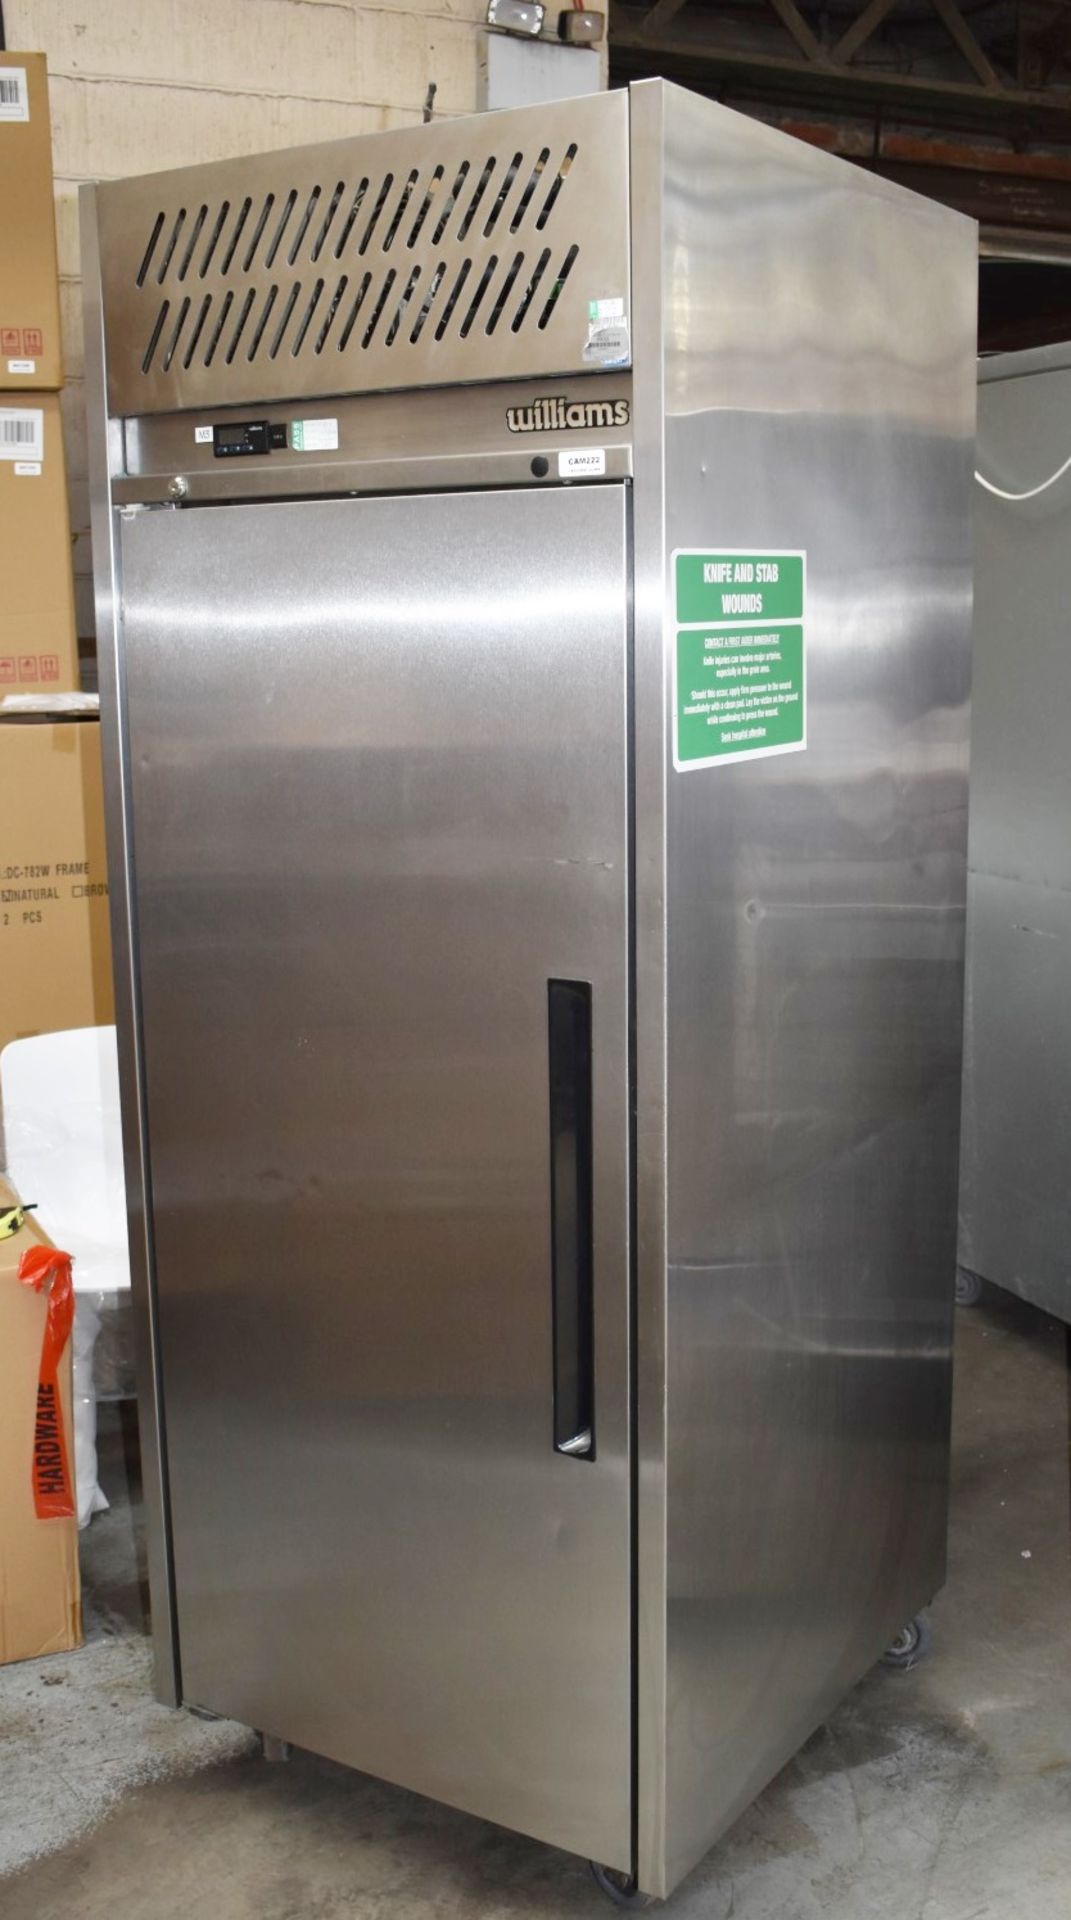 1 x Williams Upright Single Door Refrigerator With Stainless Steel Exterior - Model HJ1TSA - Image 3 of 10